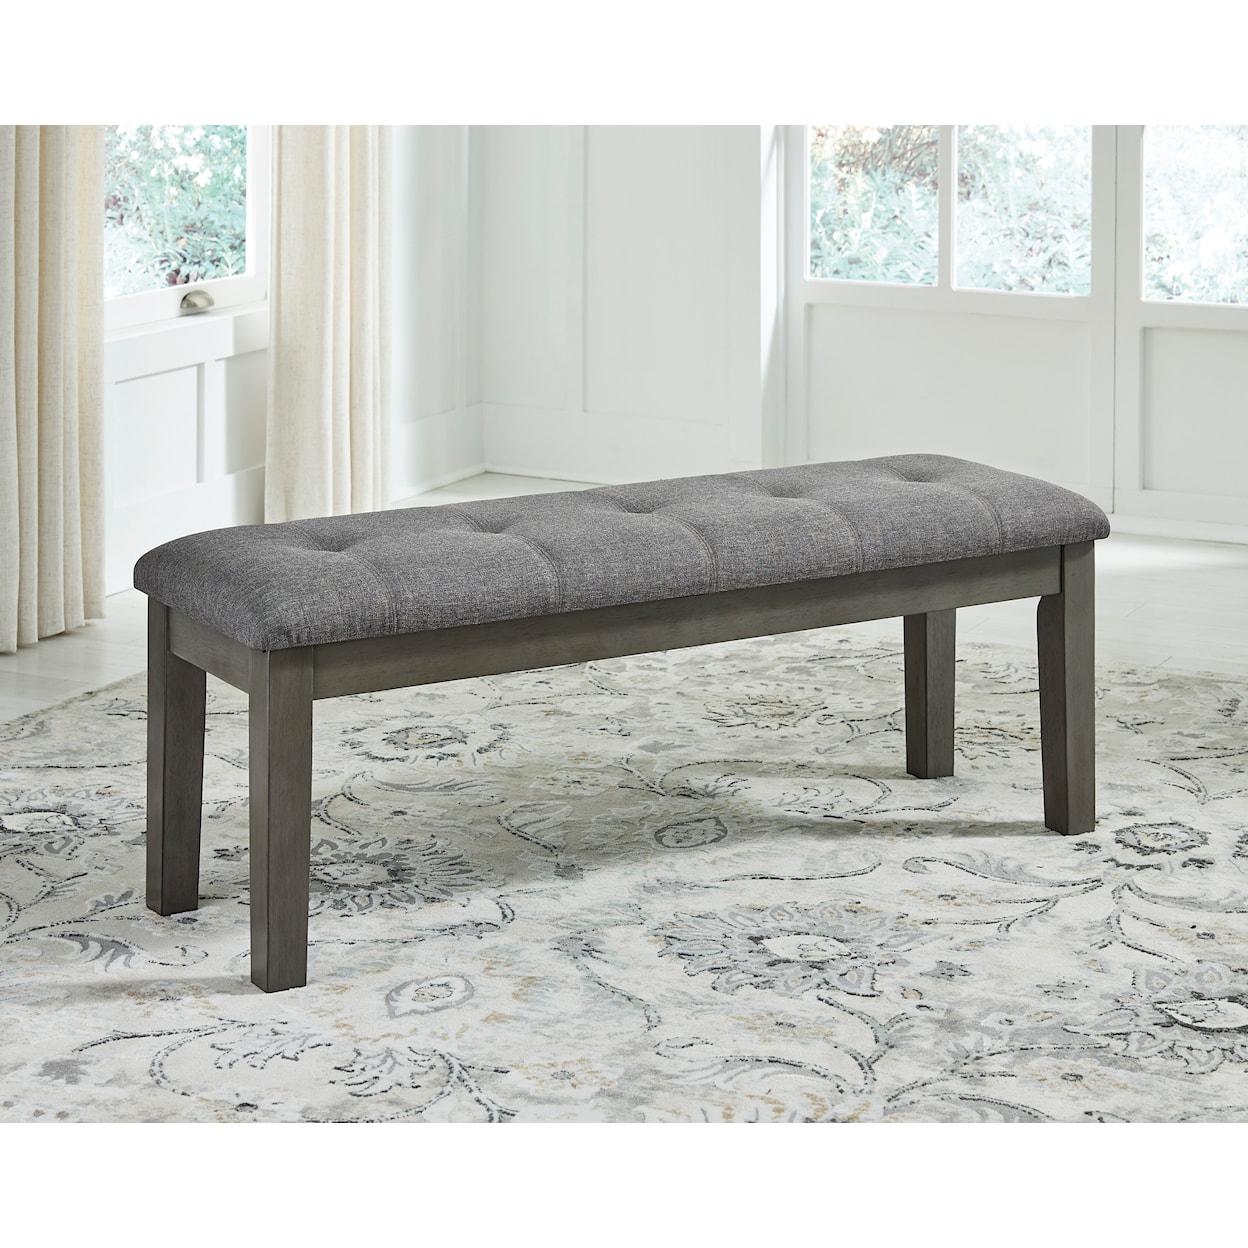 Signature Design by Ashley Hallanden Dining Benches